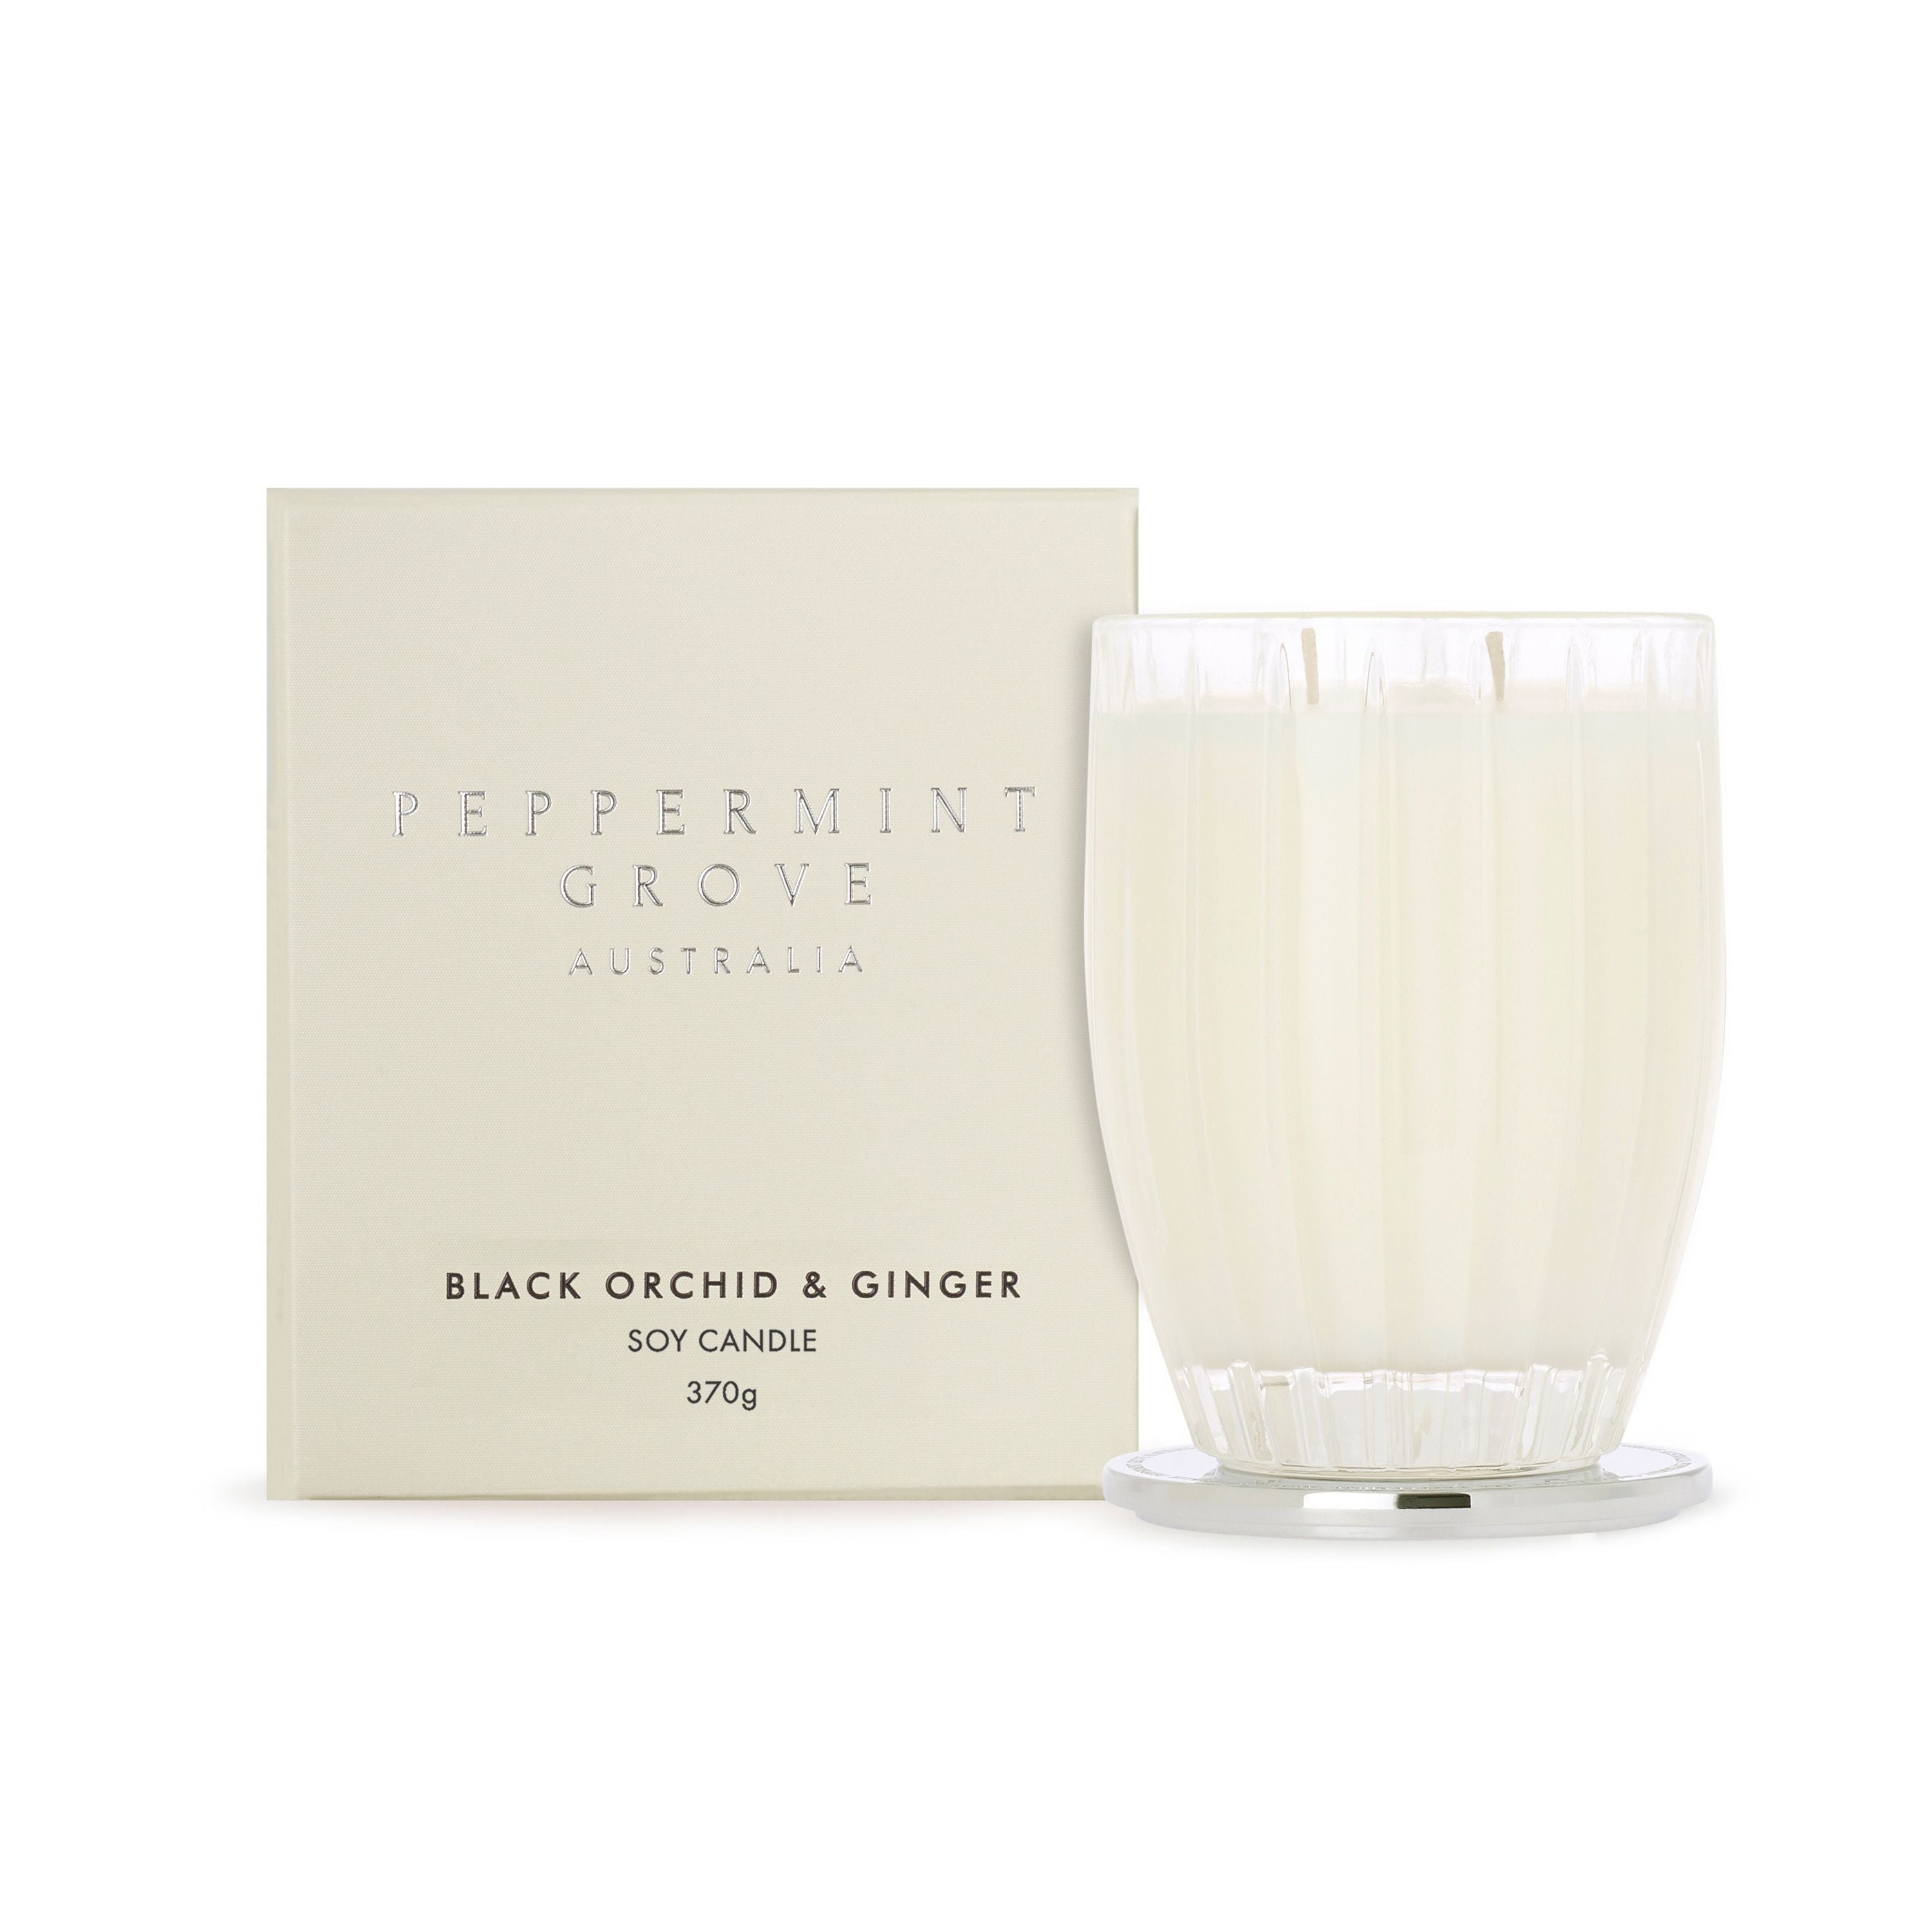 Peppermint Grove Australia - Black Orchid & Ginger Soy Candle - 370g